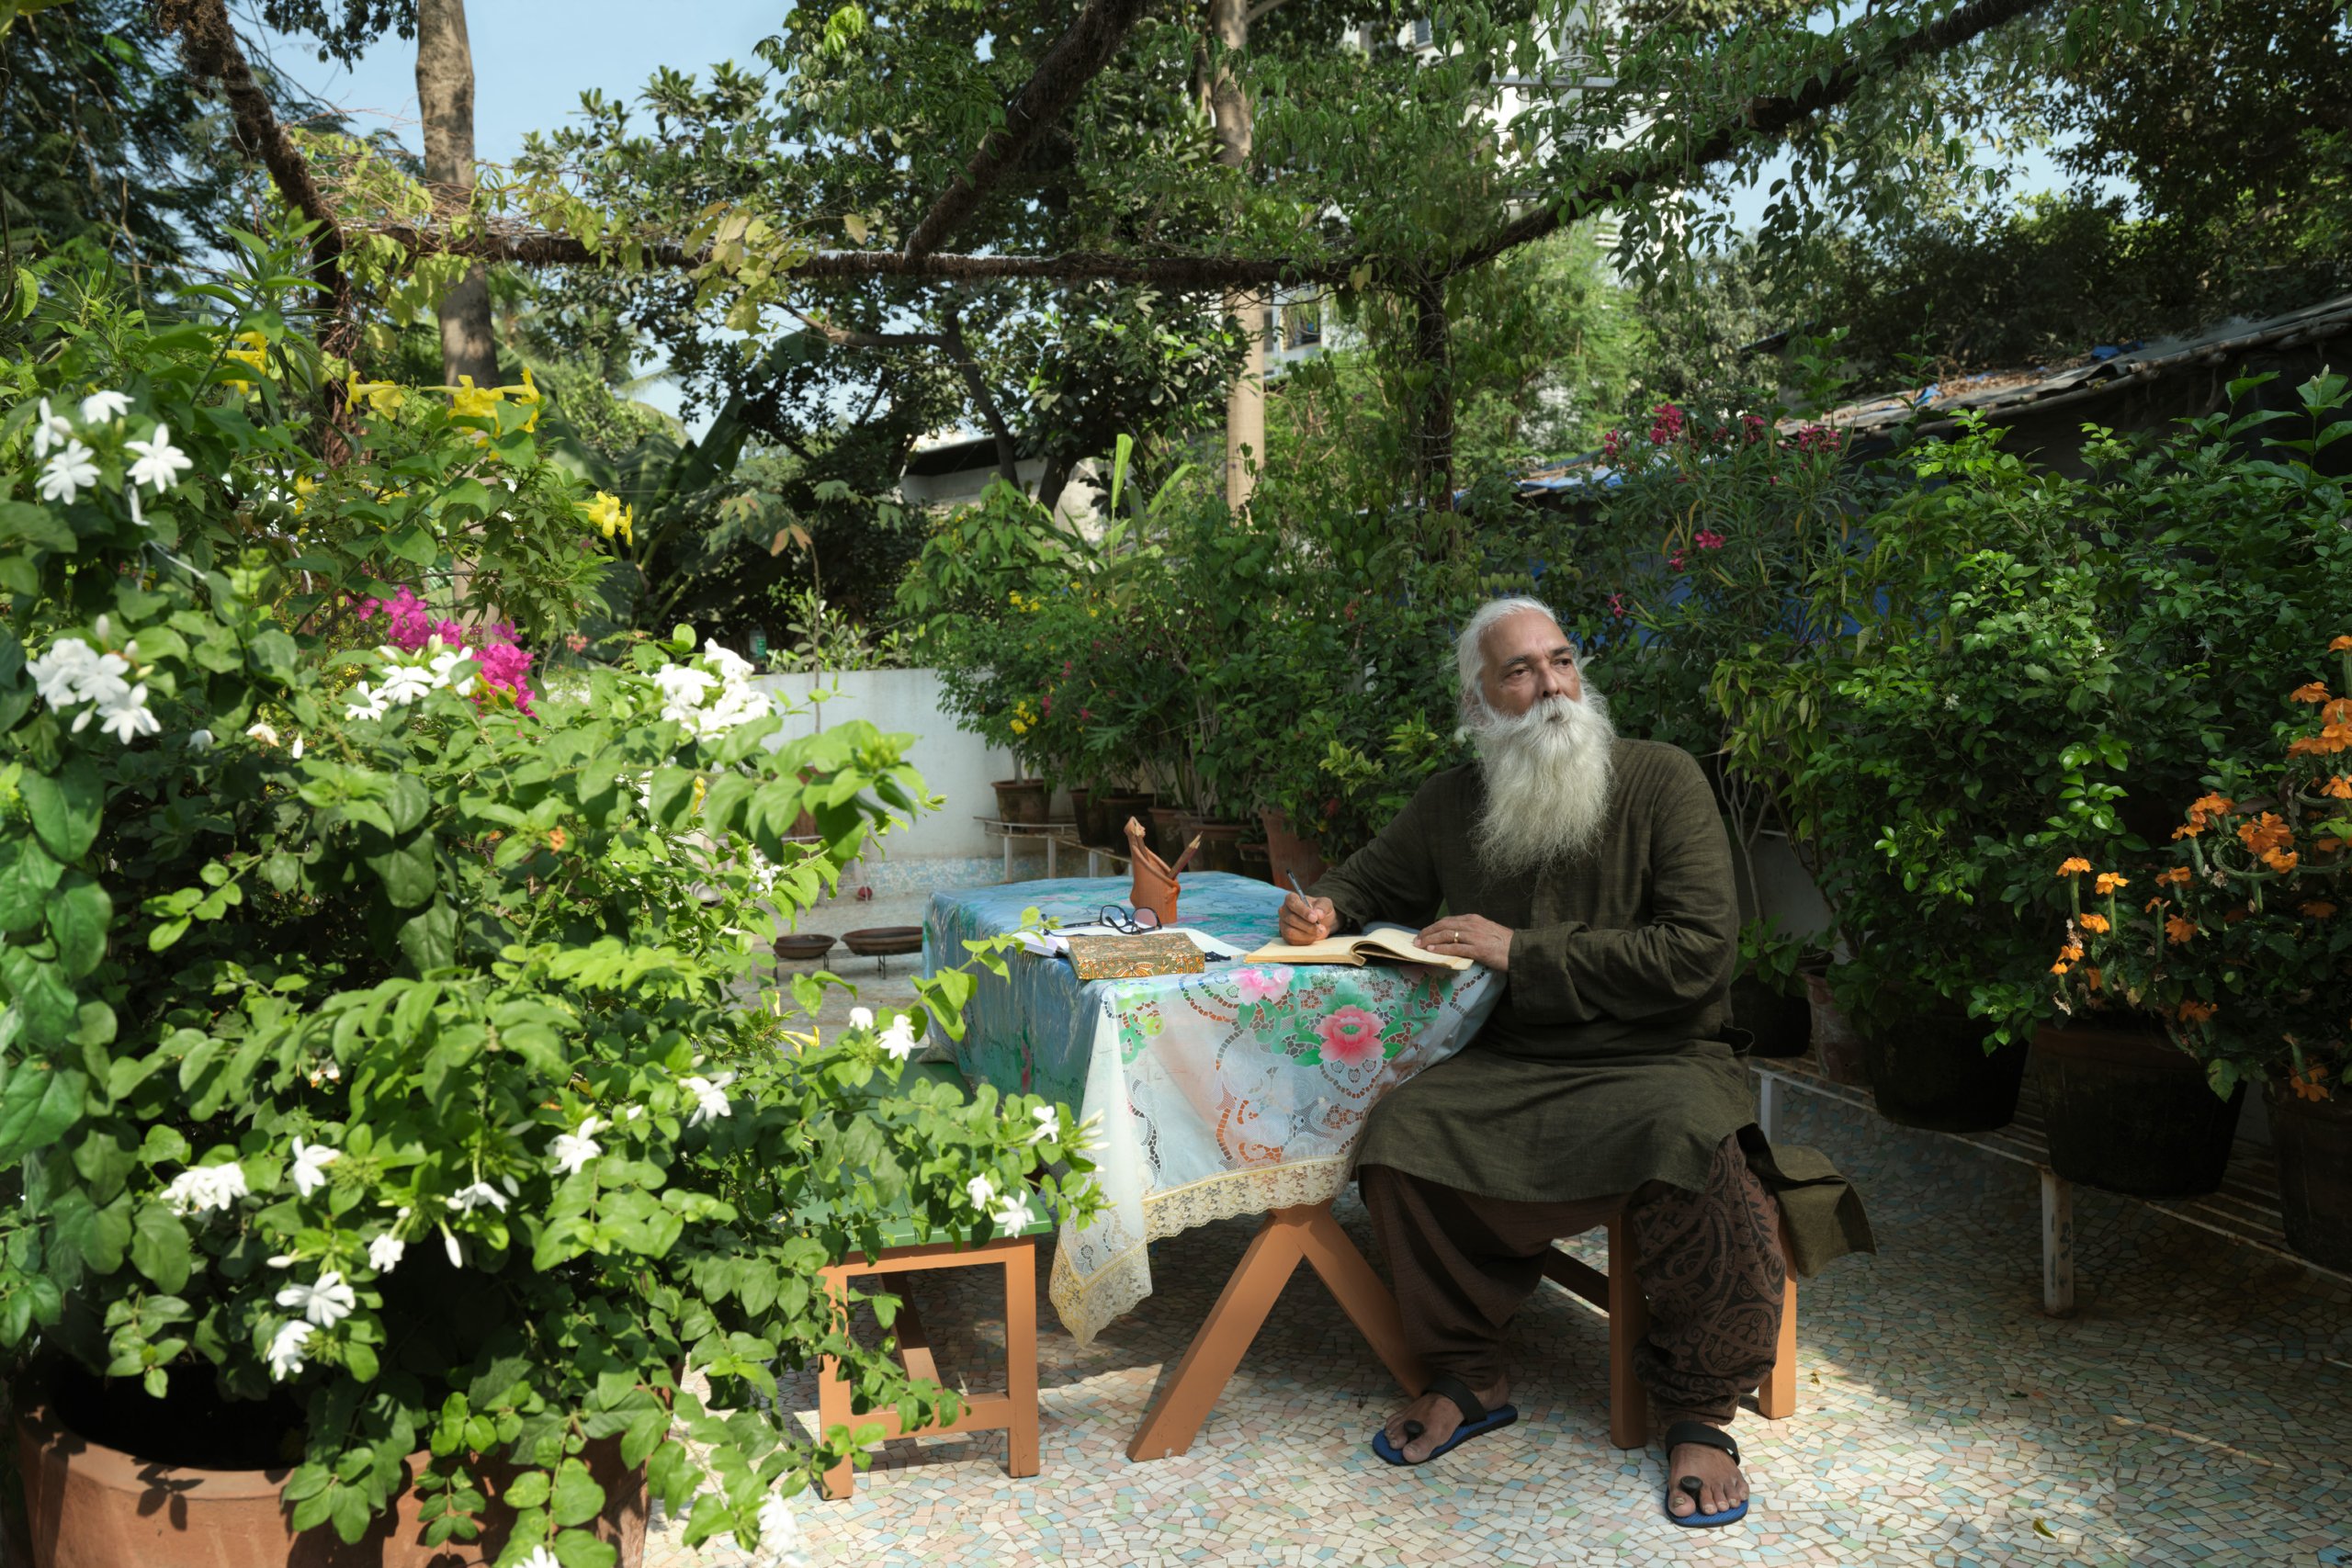 Gangadharan sitting by a clothed table in his garden, surrounded by flower and plants.